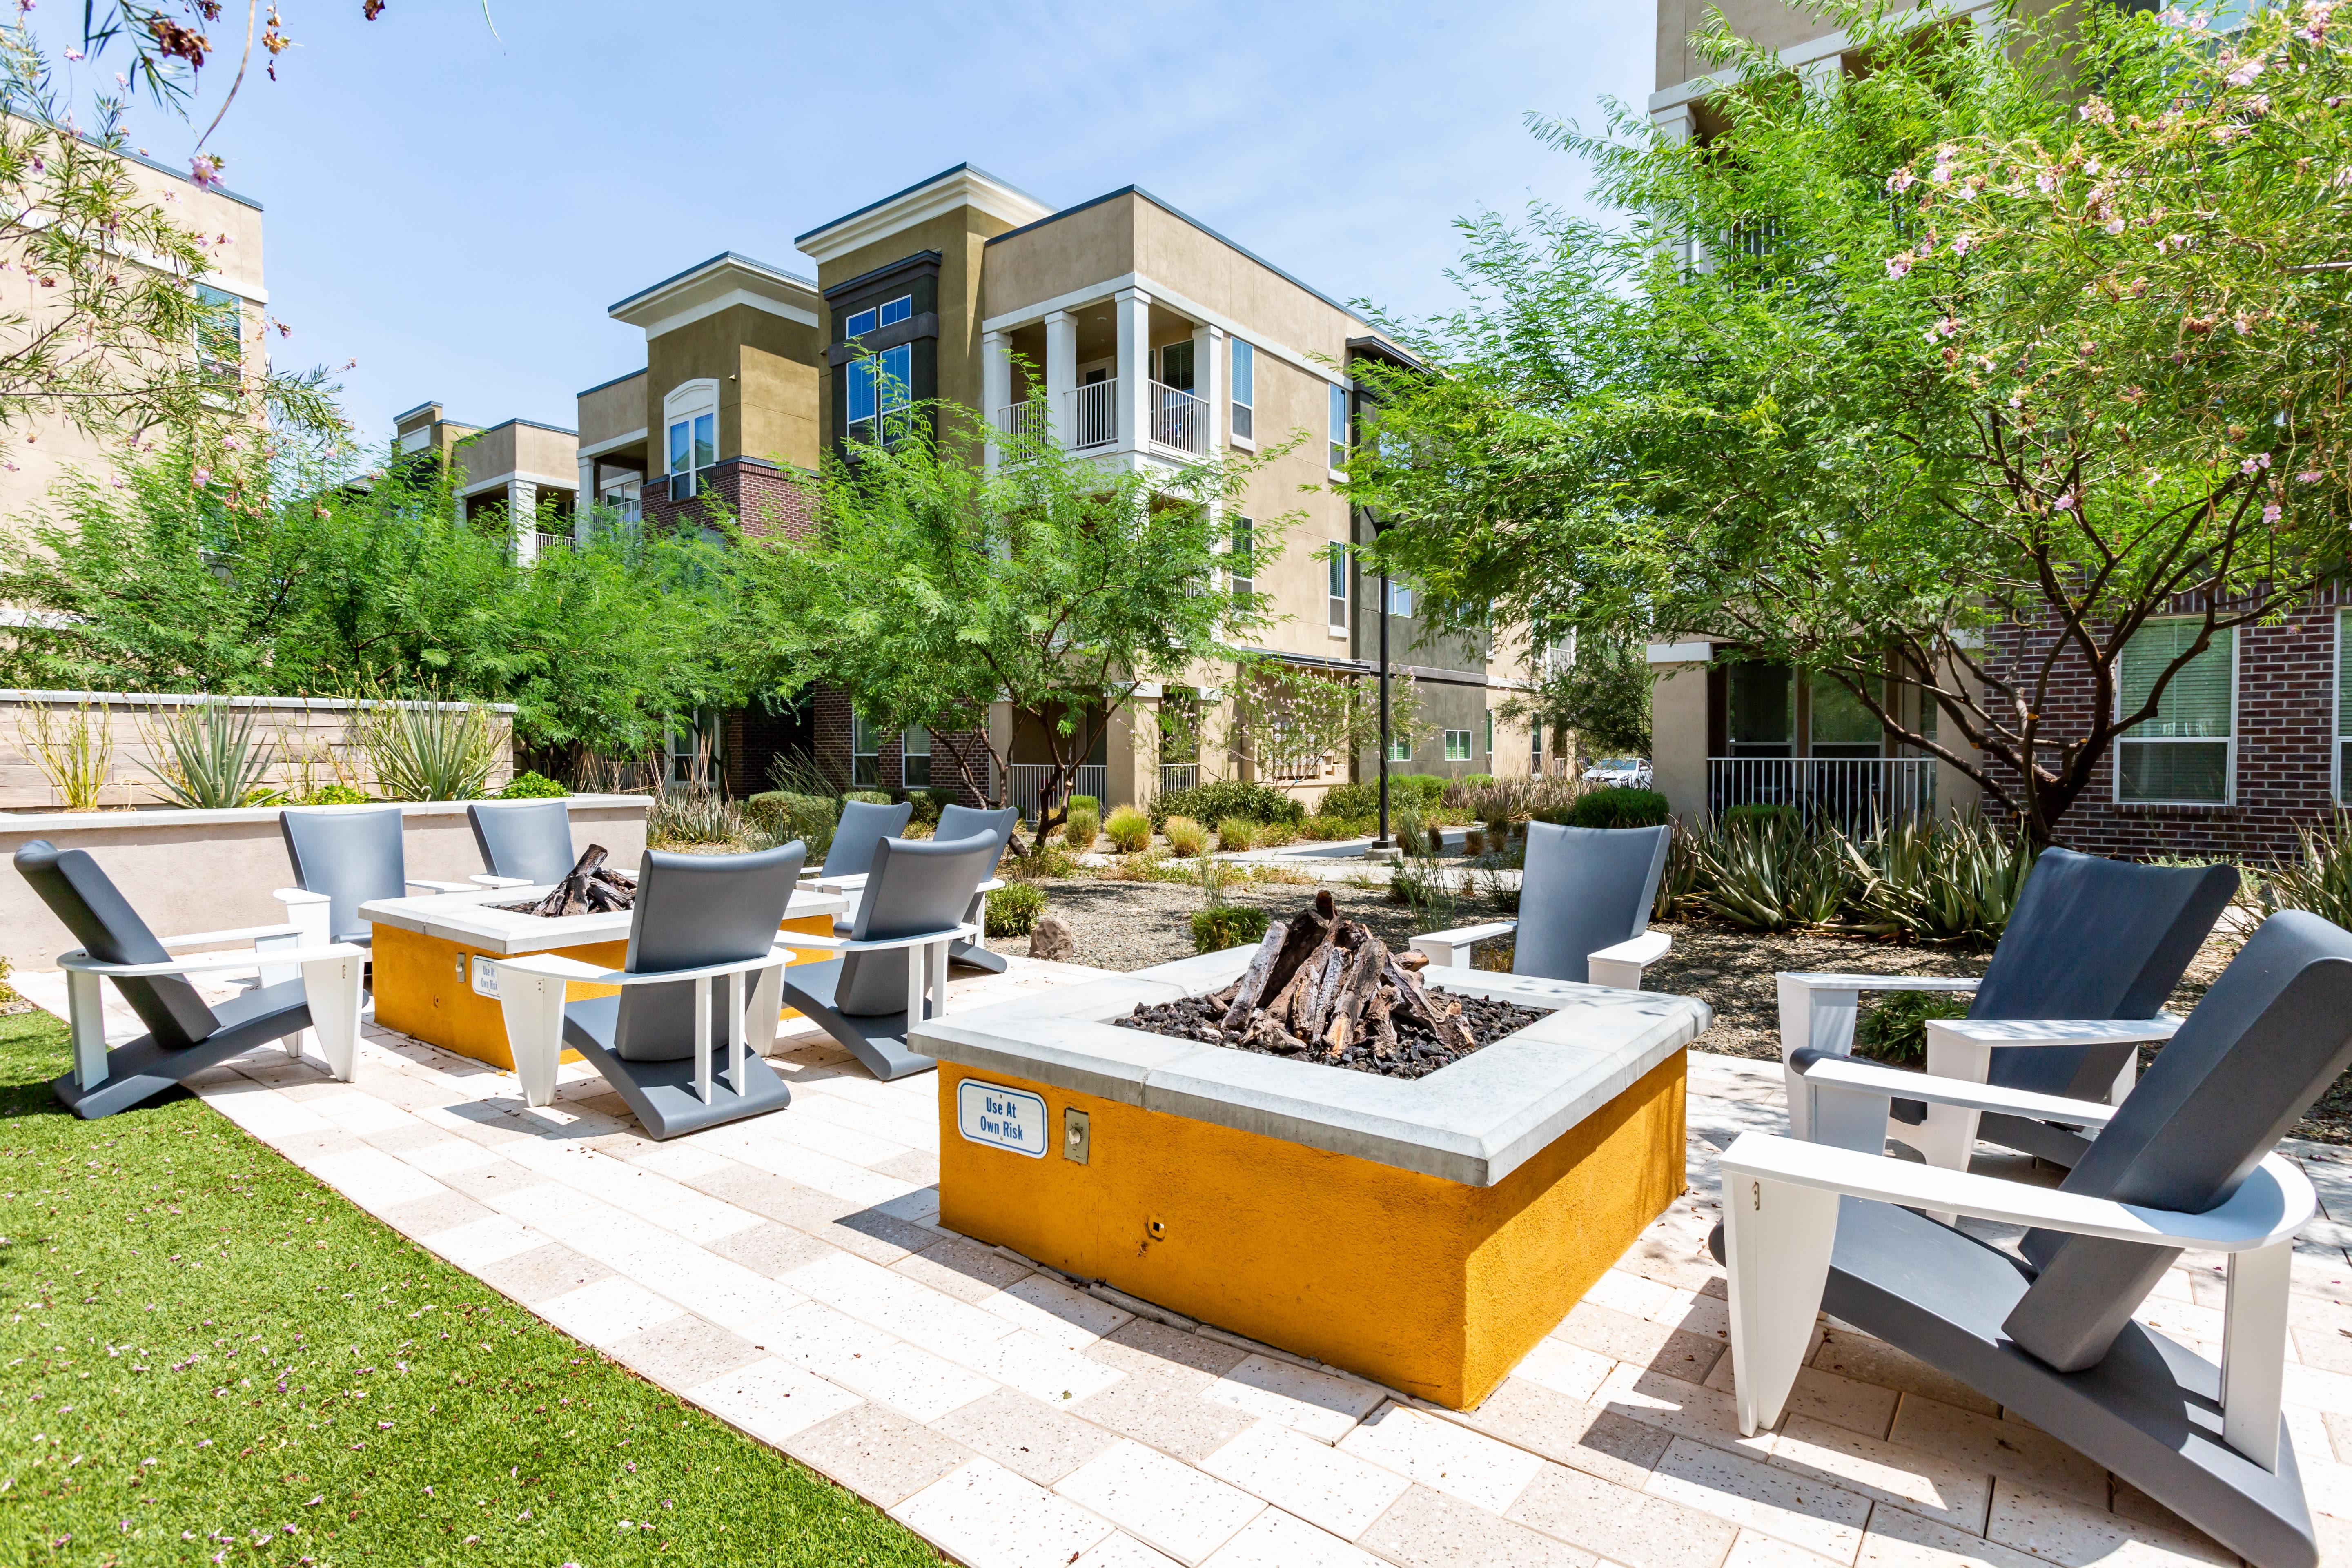 Firepits and outdoor lounge at Town Commons in Gilbert, Arizona